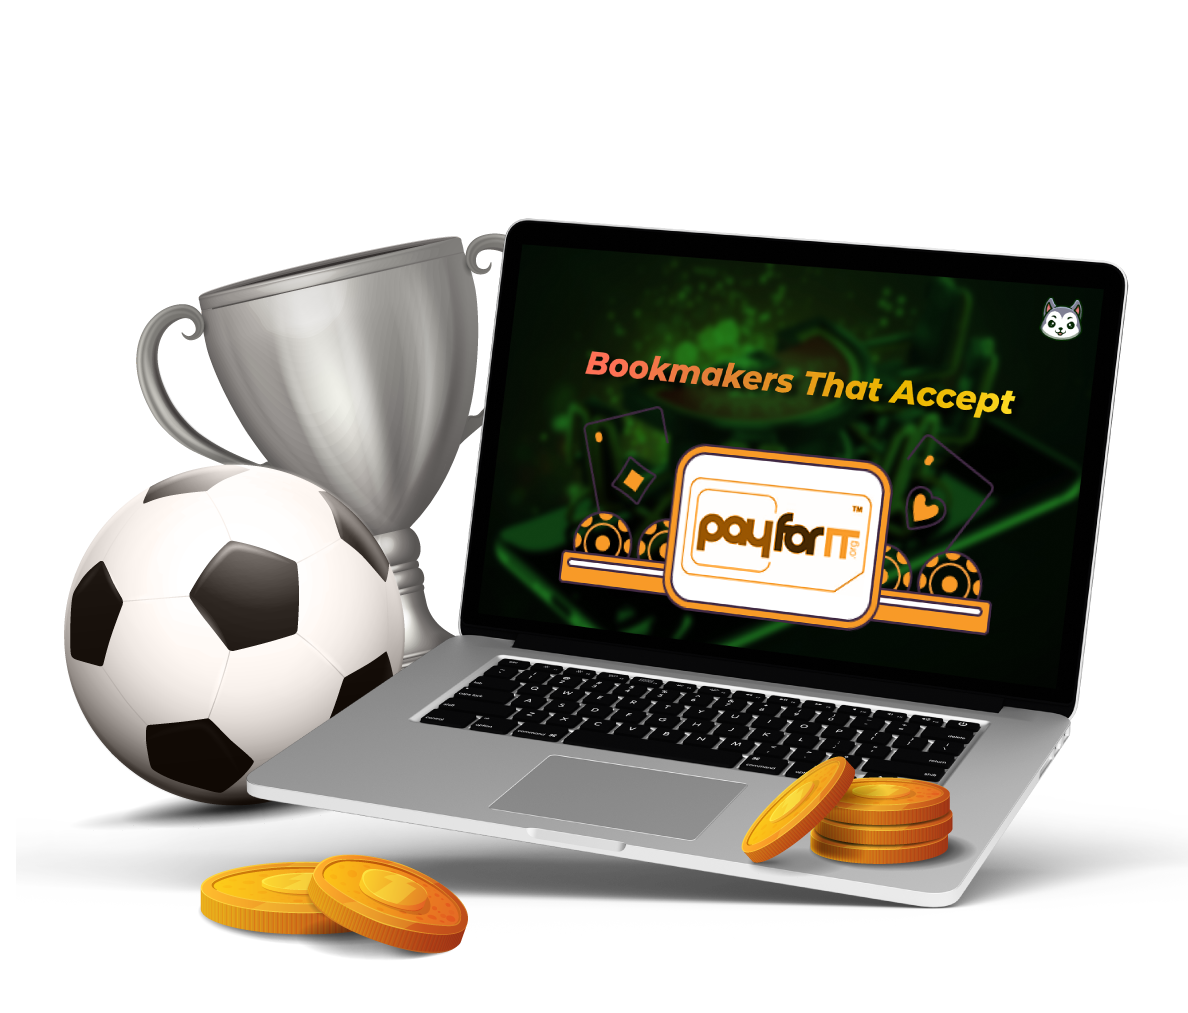 Bookmakers That Accept PayForIt